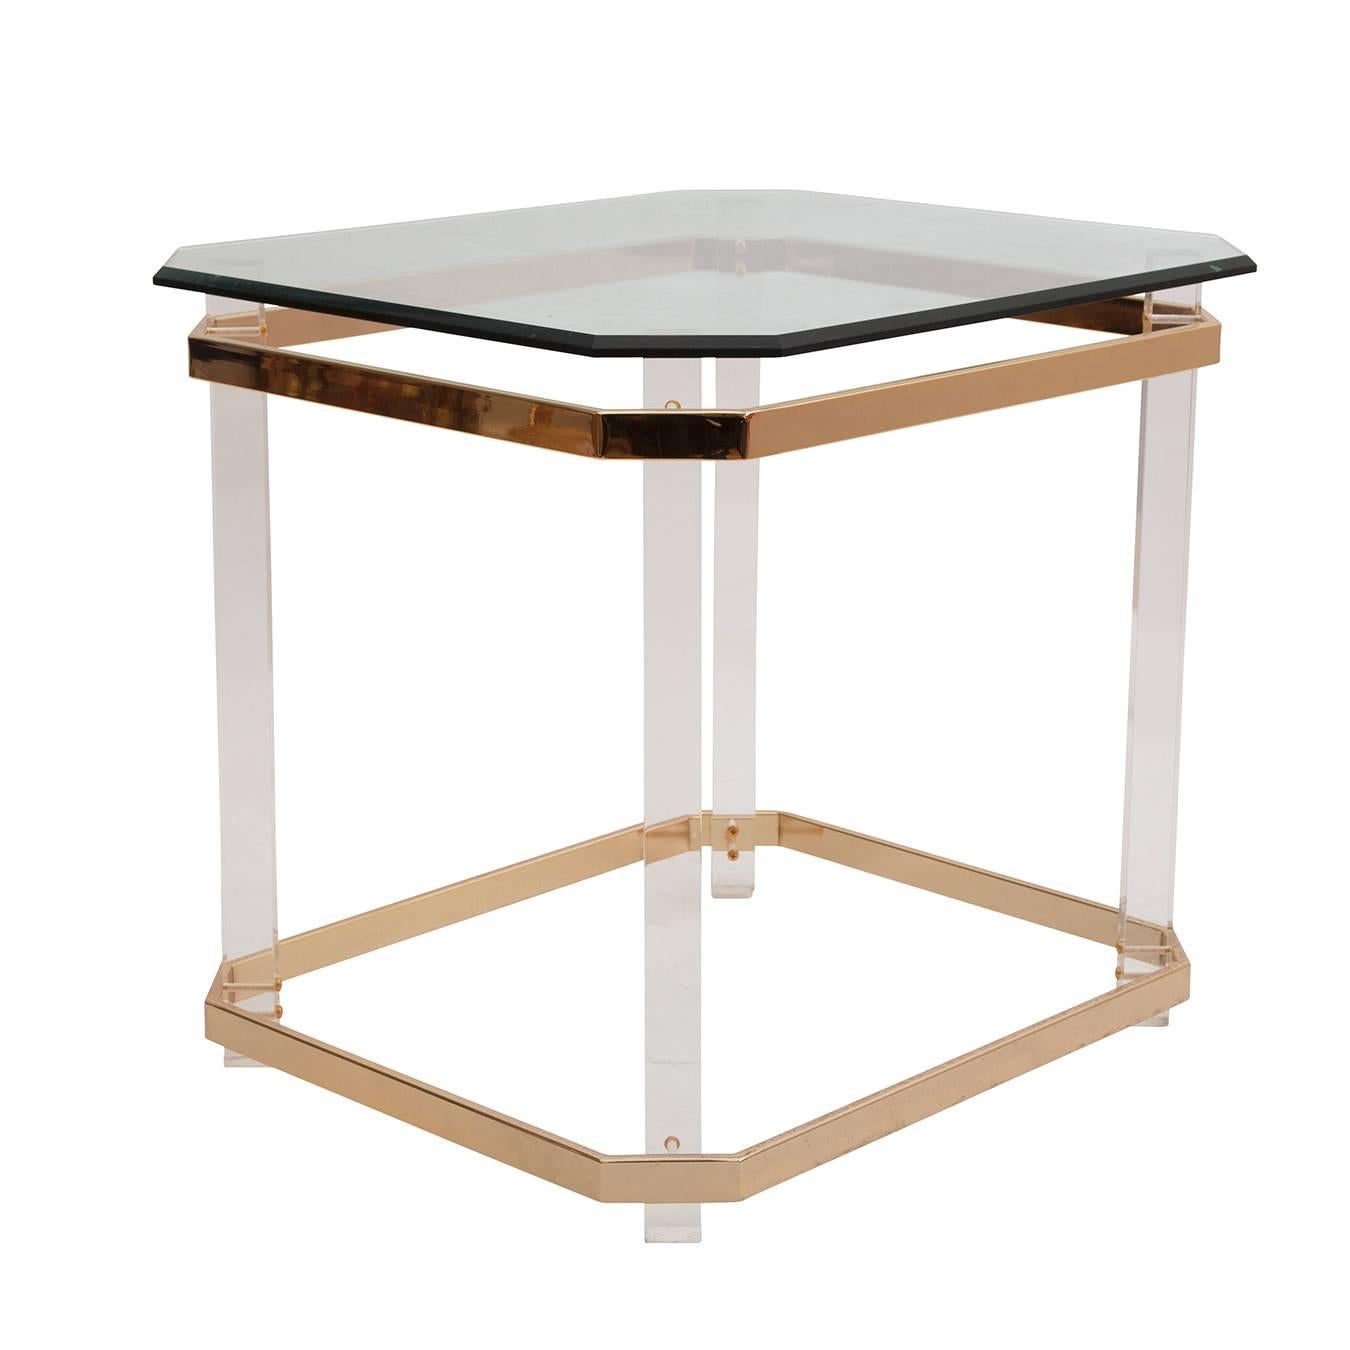 Late 20th Century Charles Hollis Jones Lucite, Brass and Glass Side Table, circa 1970s For Sale